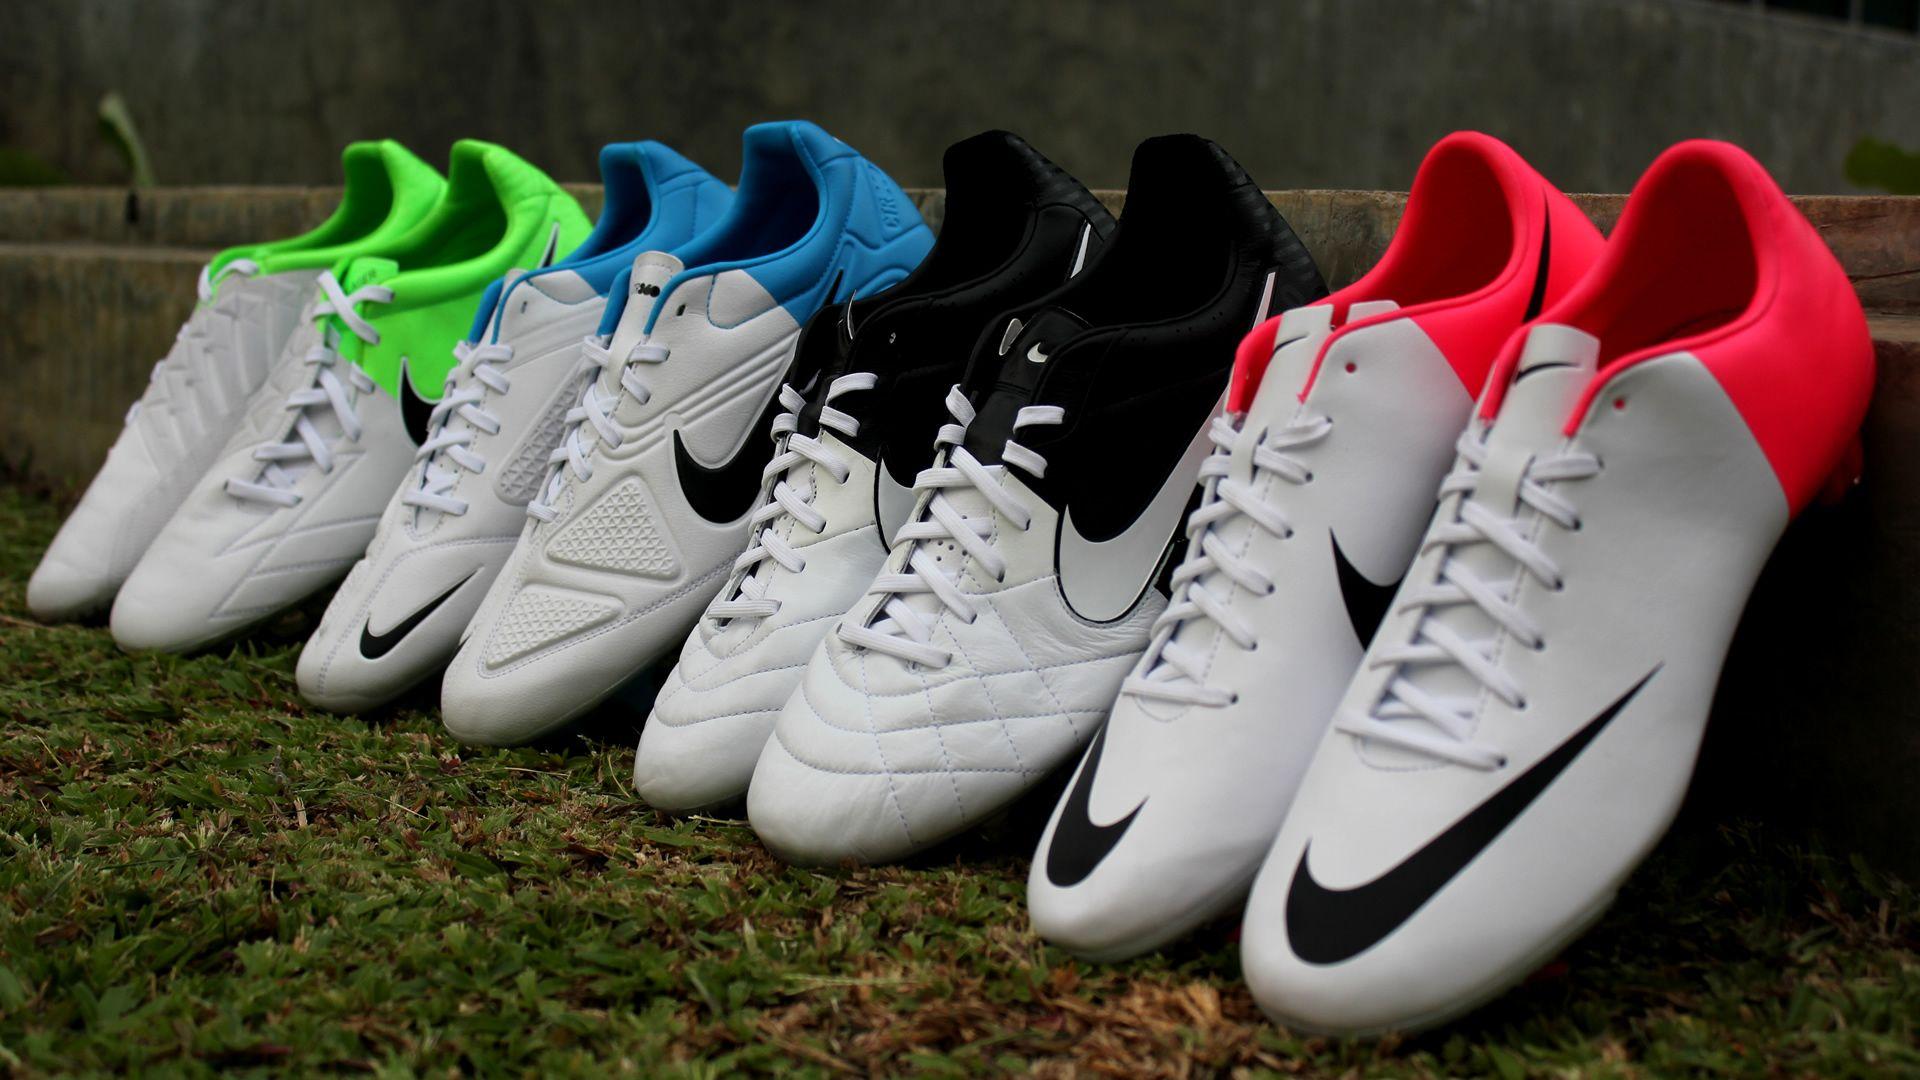 Download Football Shoes Wallpaper Gallery